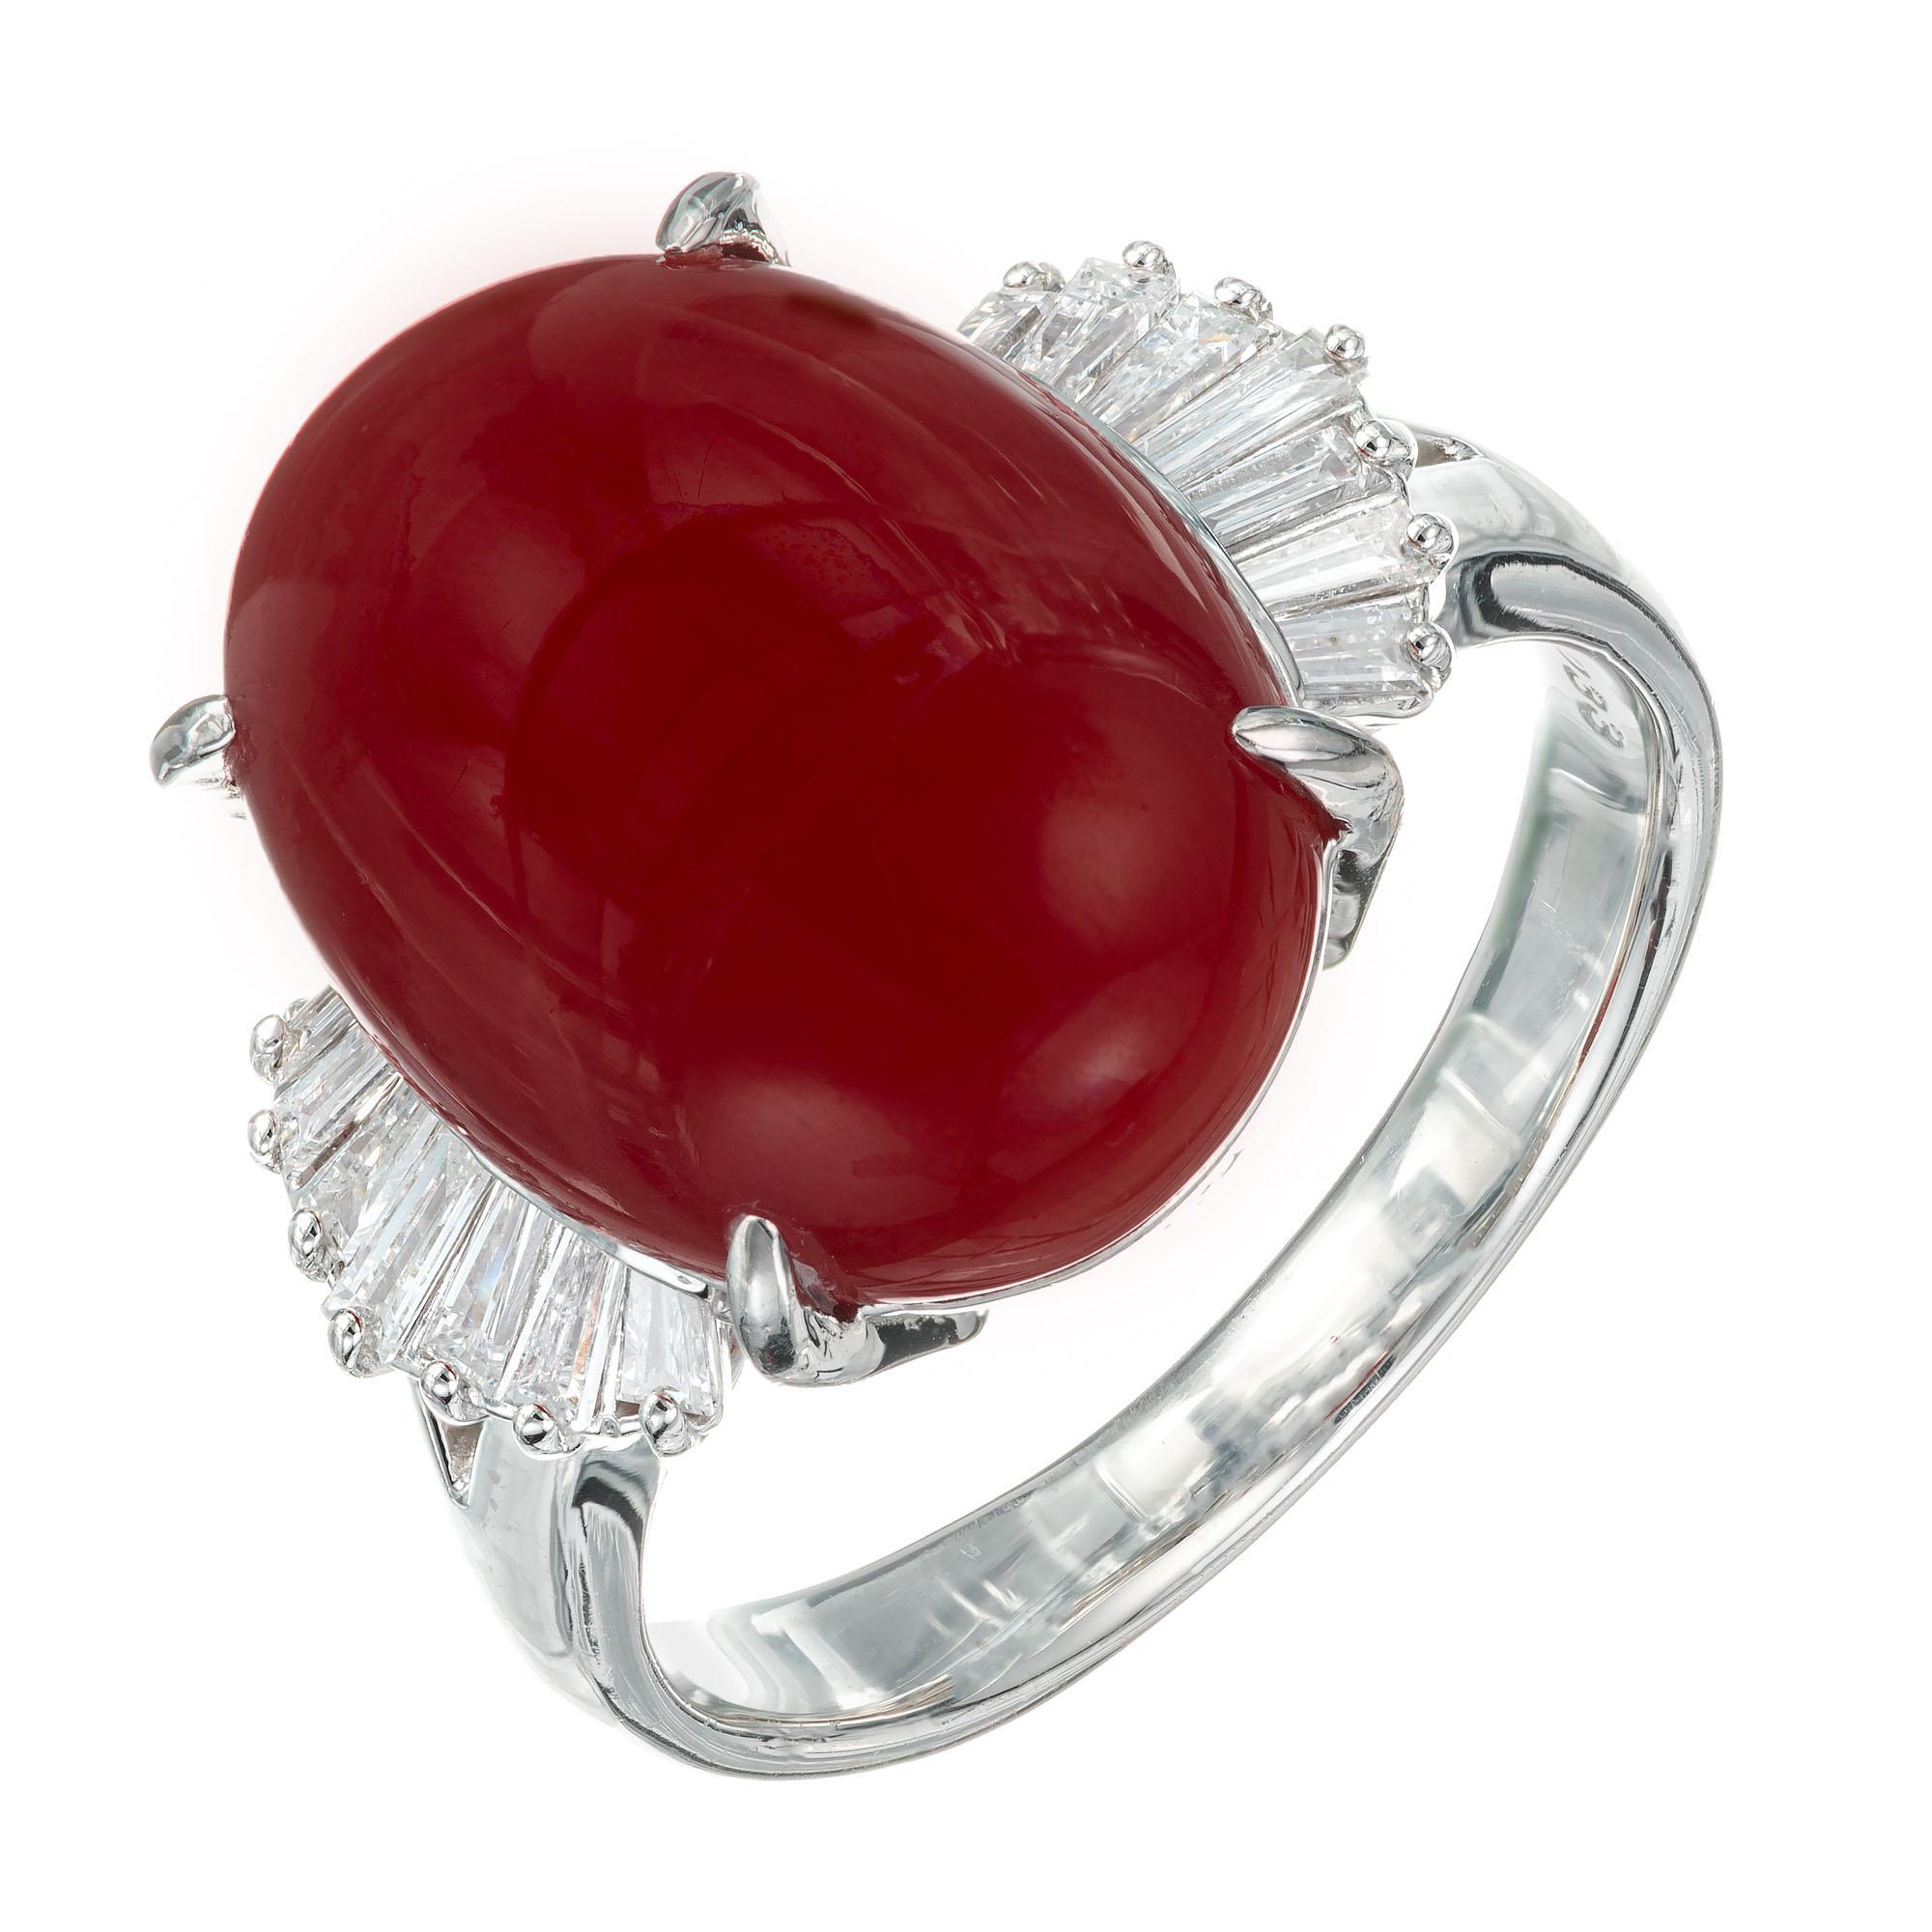 Coral and diamond ring. GIA Certified natural, untreated oval cabochon coral center stone. Set in platinum with 14 tapered baguette accent diamonds.  

1 oval orangey red cabochon coral, approx. 7.11cts GIA Certificate # 5212597558
14 tapered